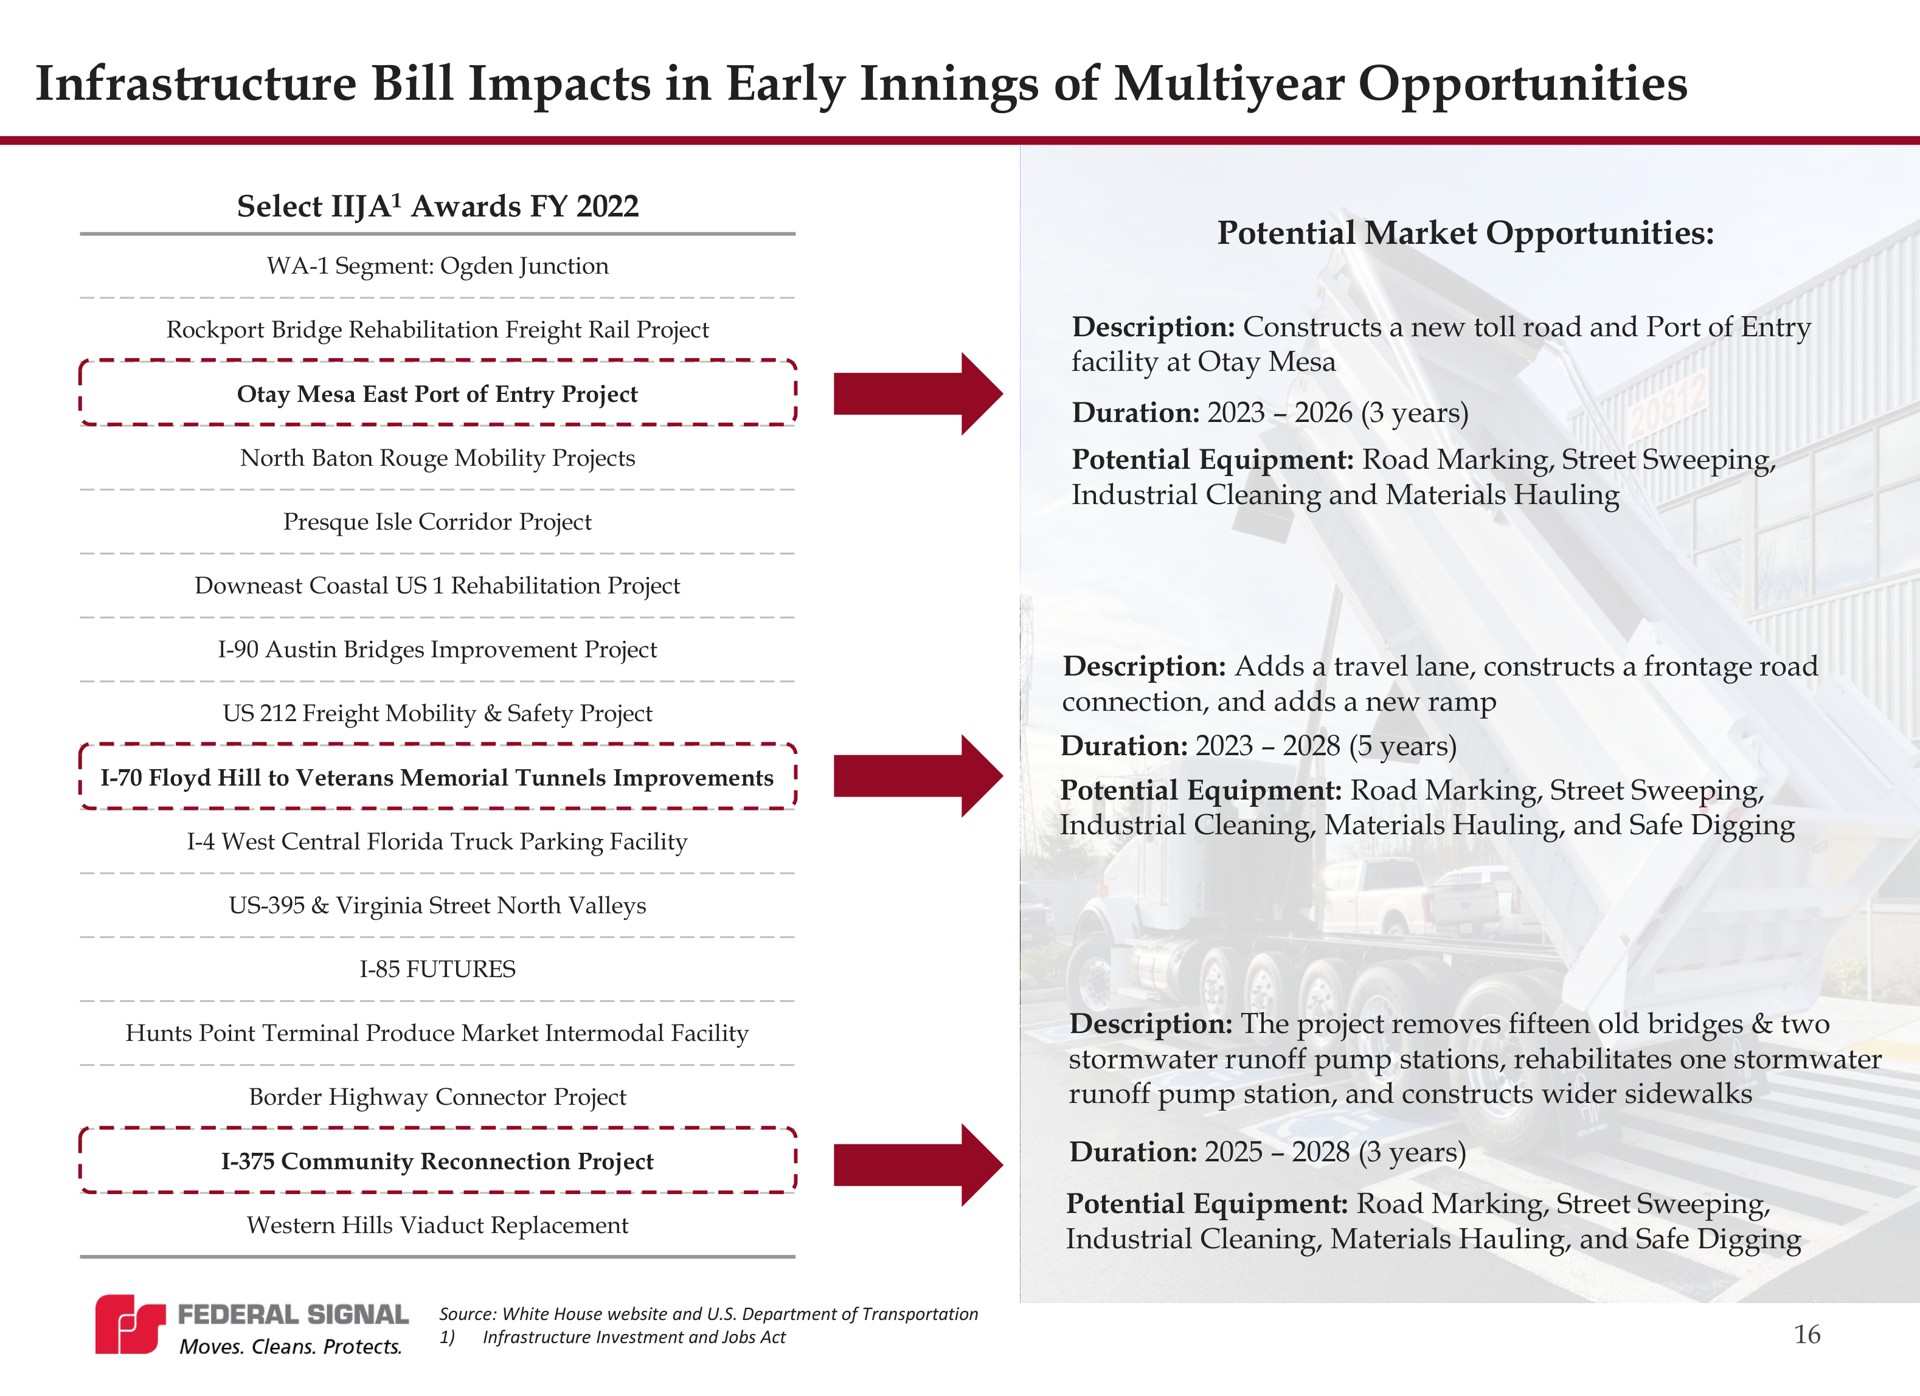 infrastructure bill impacts in early innings of opportunities | Federal Signal